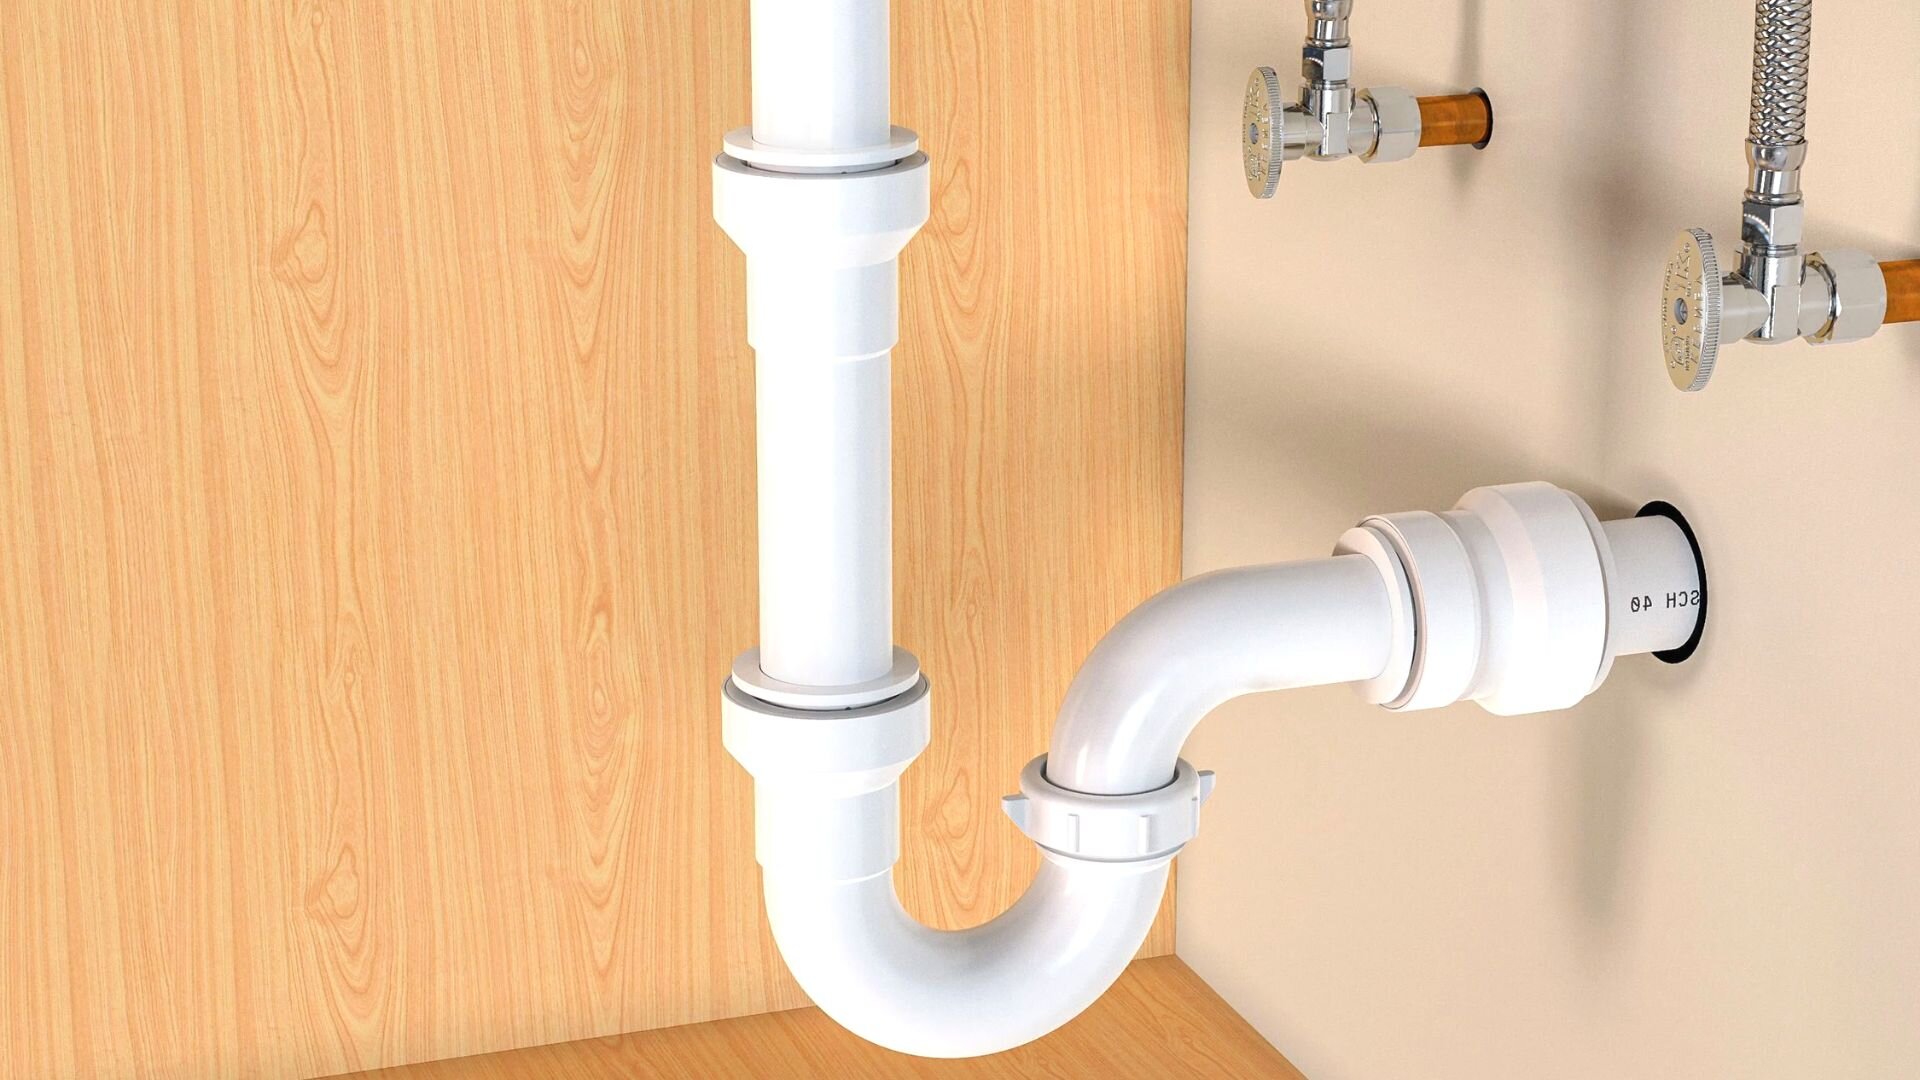 Below the Kitchen Sink: Dealing With Kitchen Drain Pipe Leaks